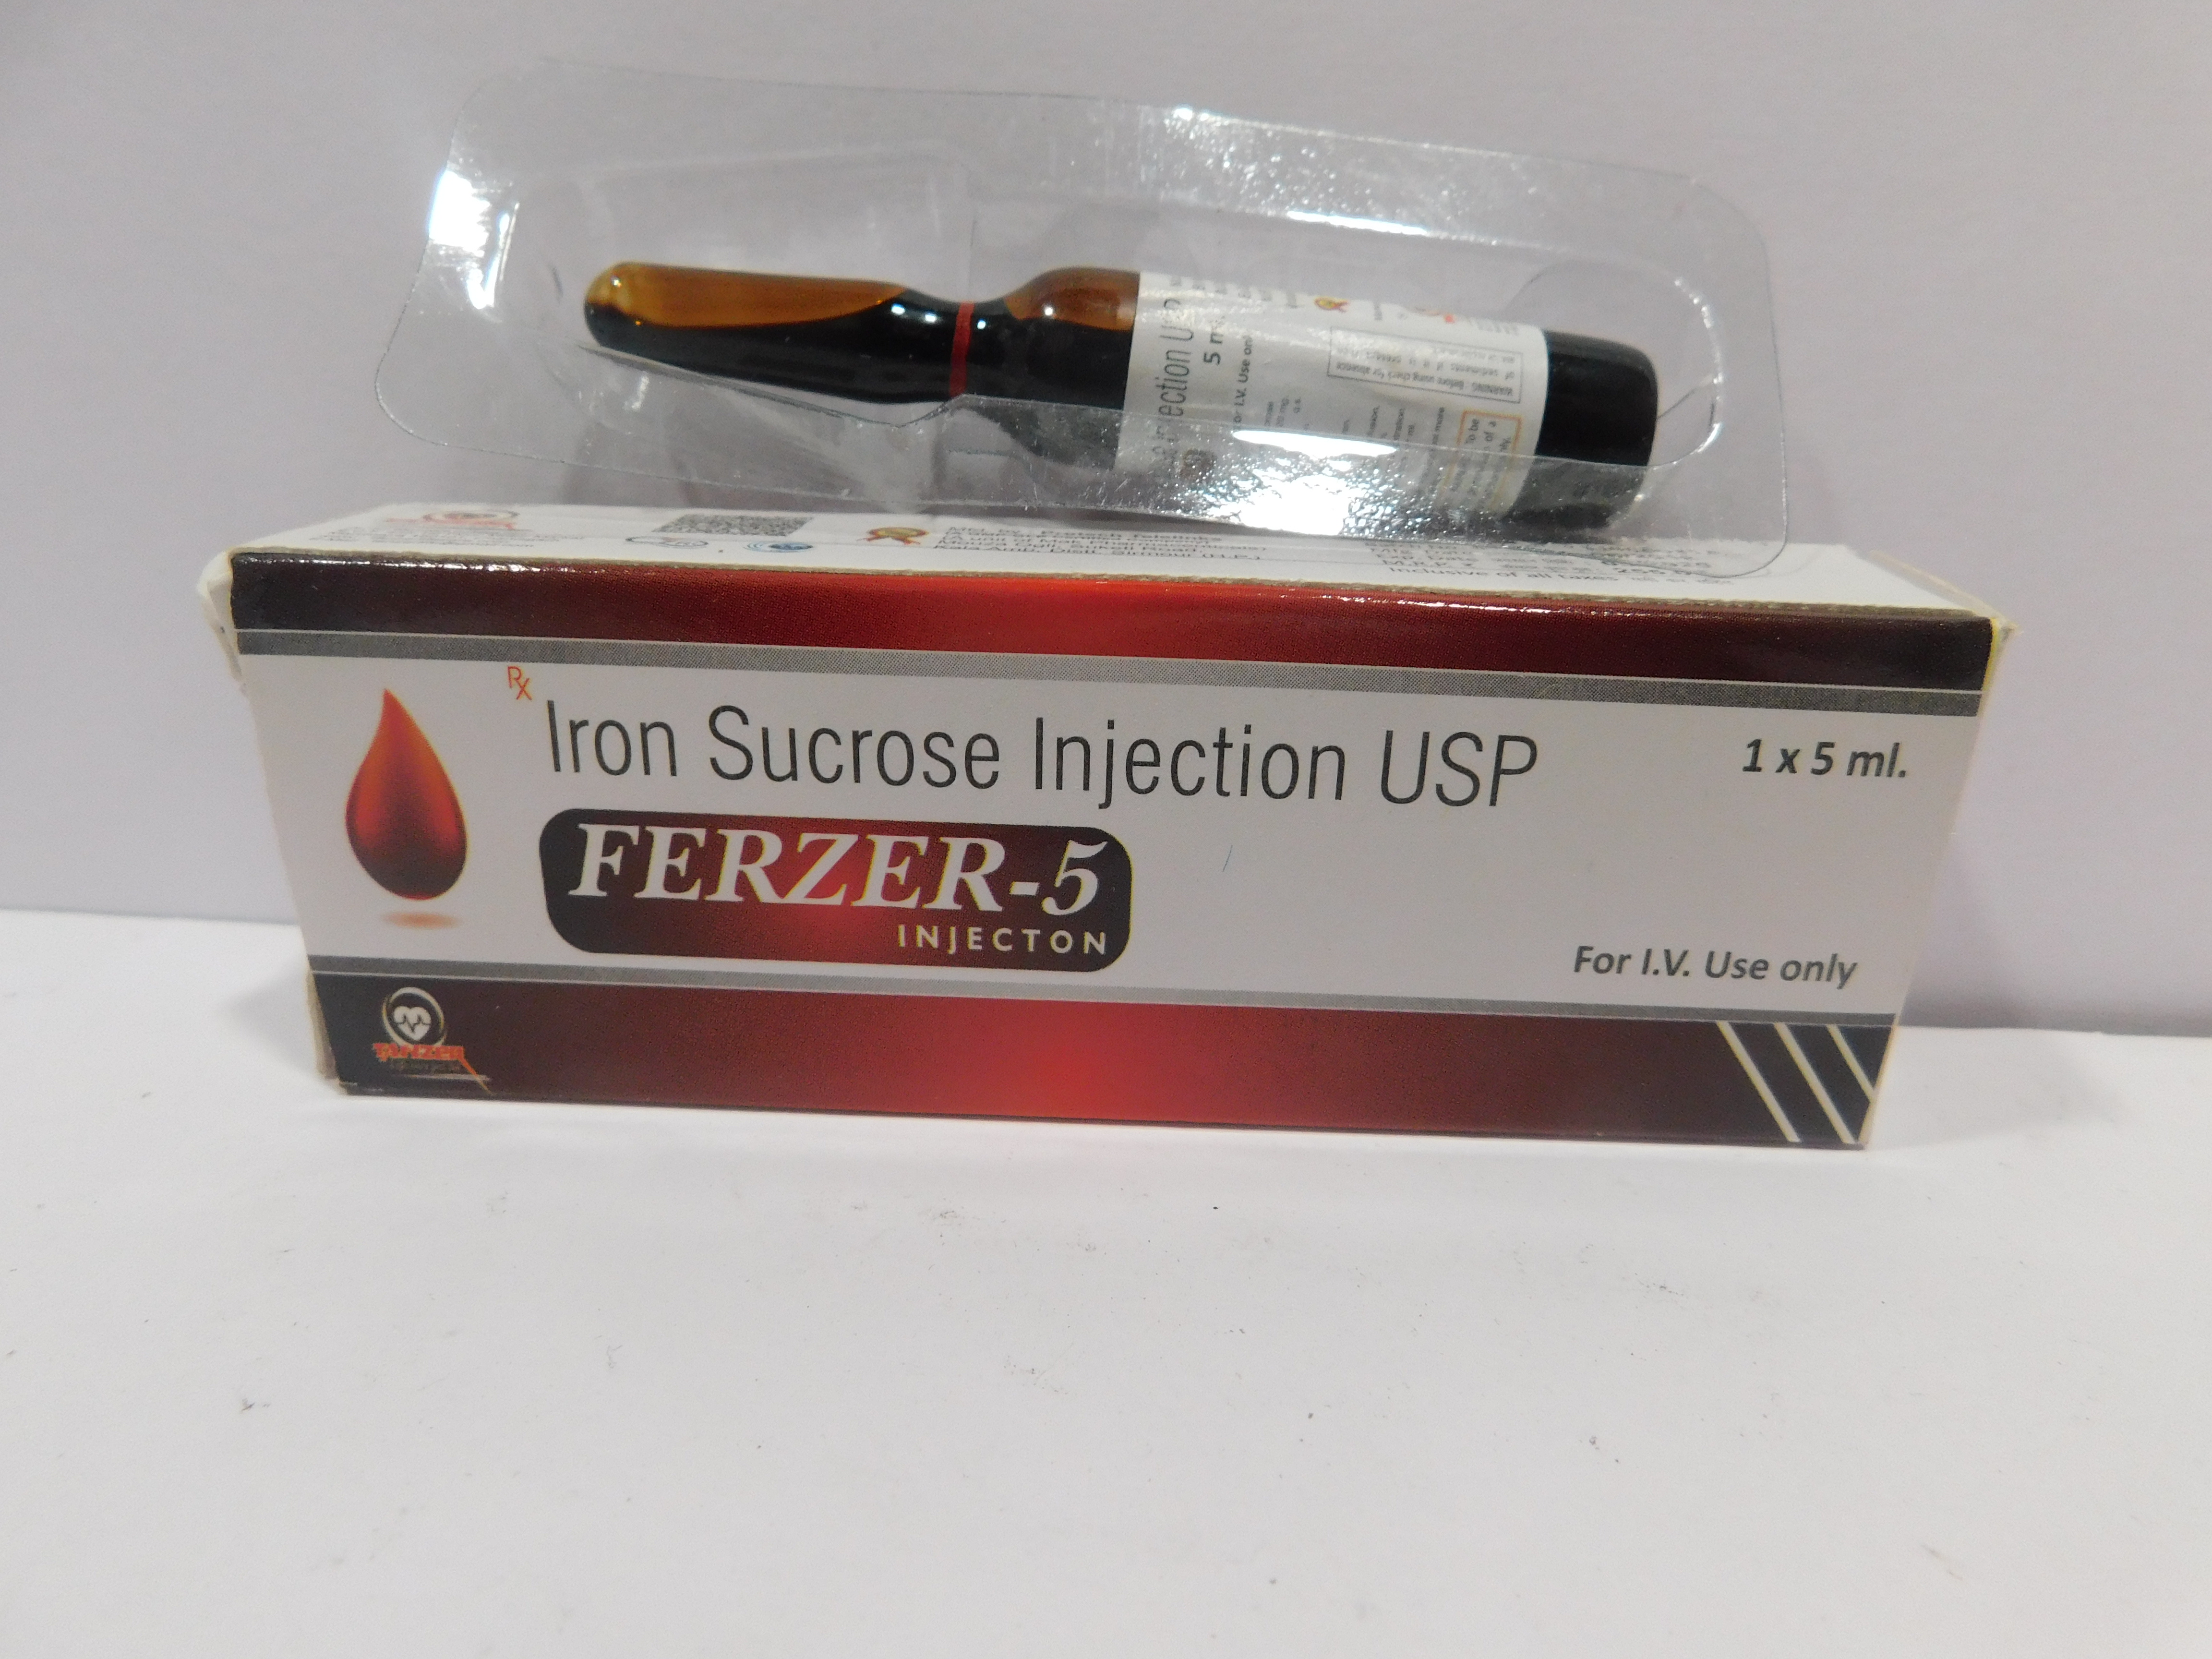 Product Name: FERZER 5, Compositions of are Iron Sucros Injection USP - Tanzer Lifecare Private Limited